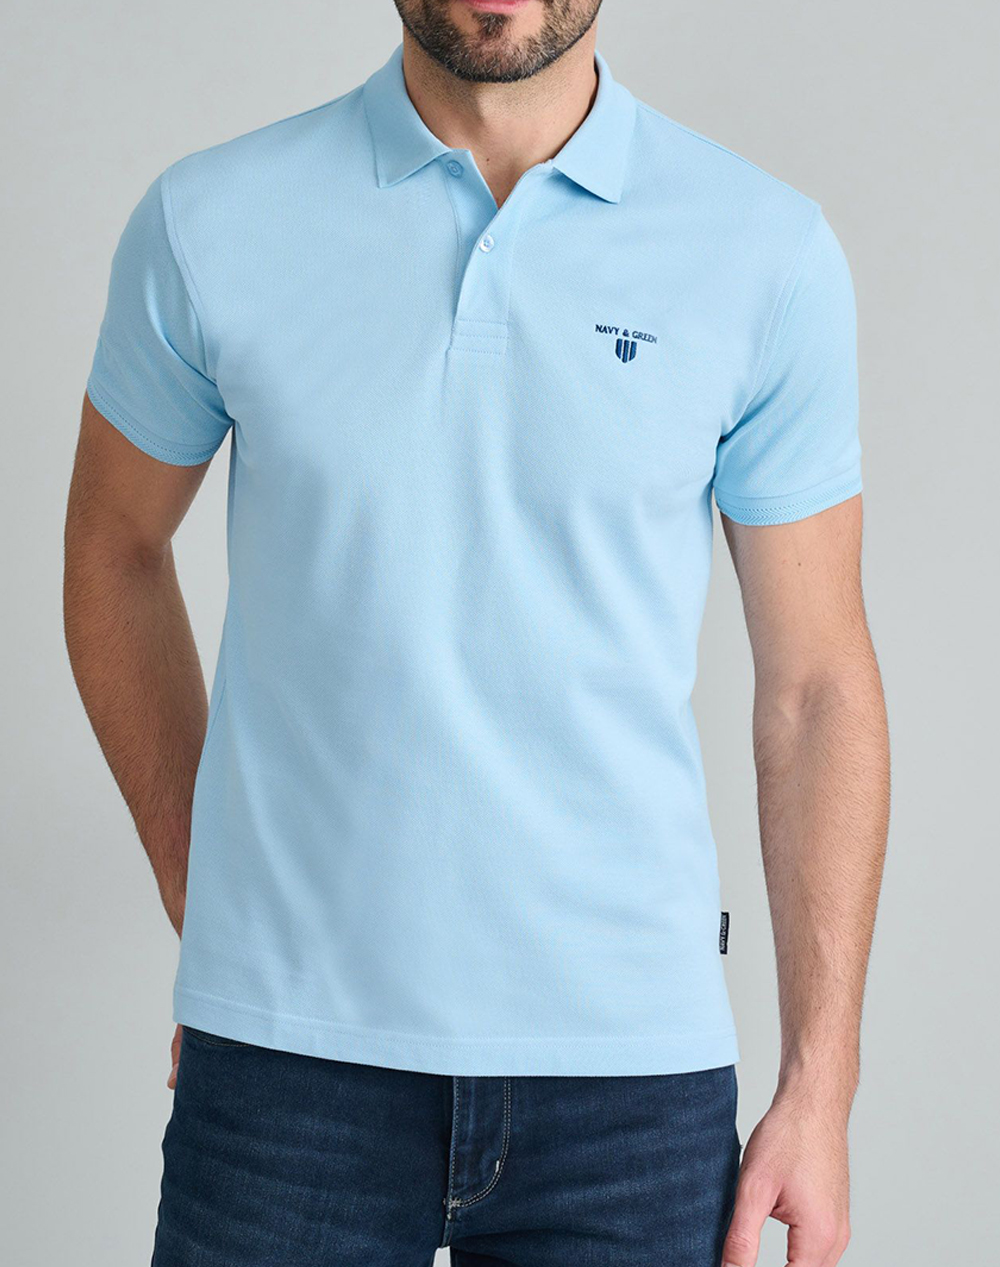 NAVY&GREEN POLO ΜΠΛΟΥΖΑΚΙ-YOUNG LINE 24EY.007/PL/YL-Dream Blue SkyBlue